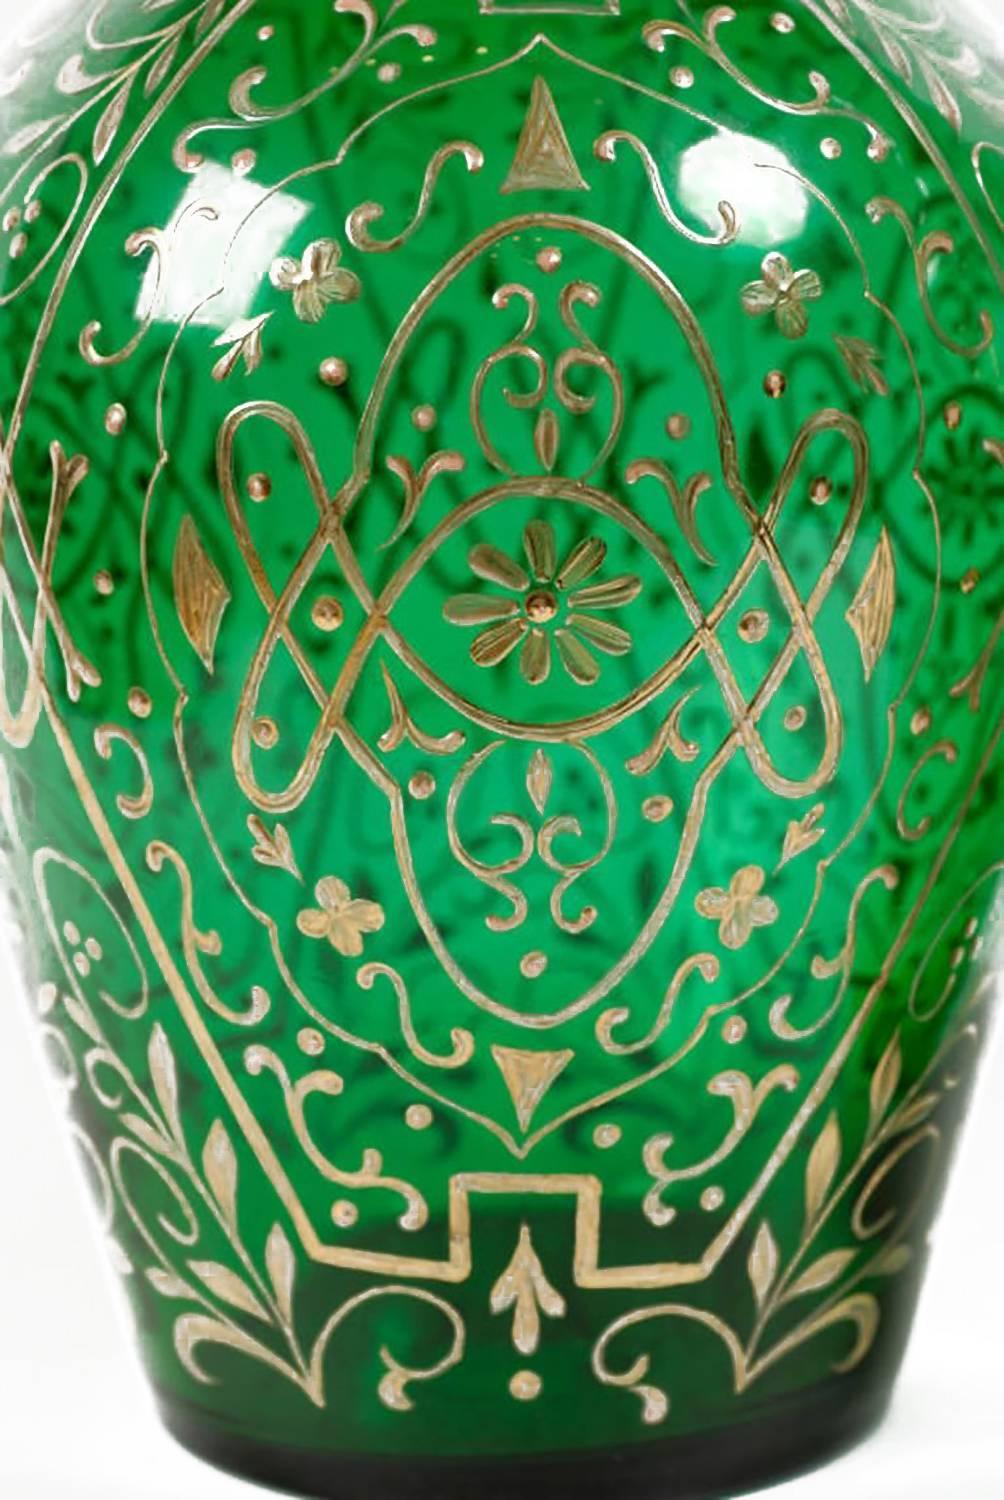 Tall and impressive, these huge green decanters have blown glass bodies with all-over gold-leaf foliate decoration. Equally impressive are the stunning stoppers, which are blown glass that was then cut into a form resembling obelisks. Believed to be